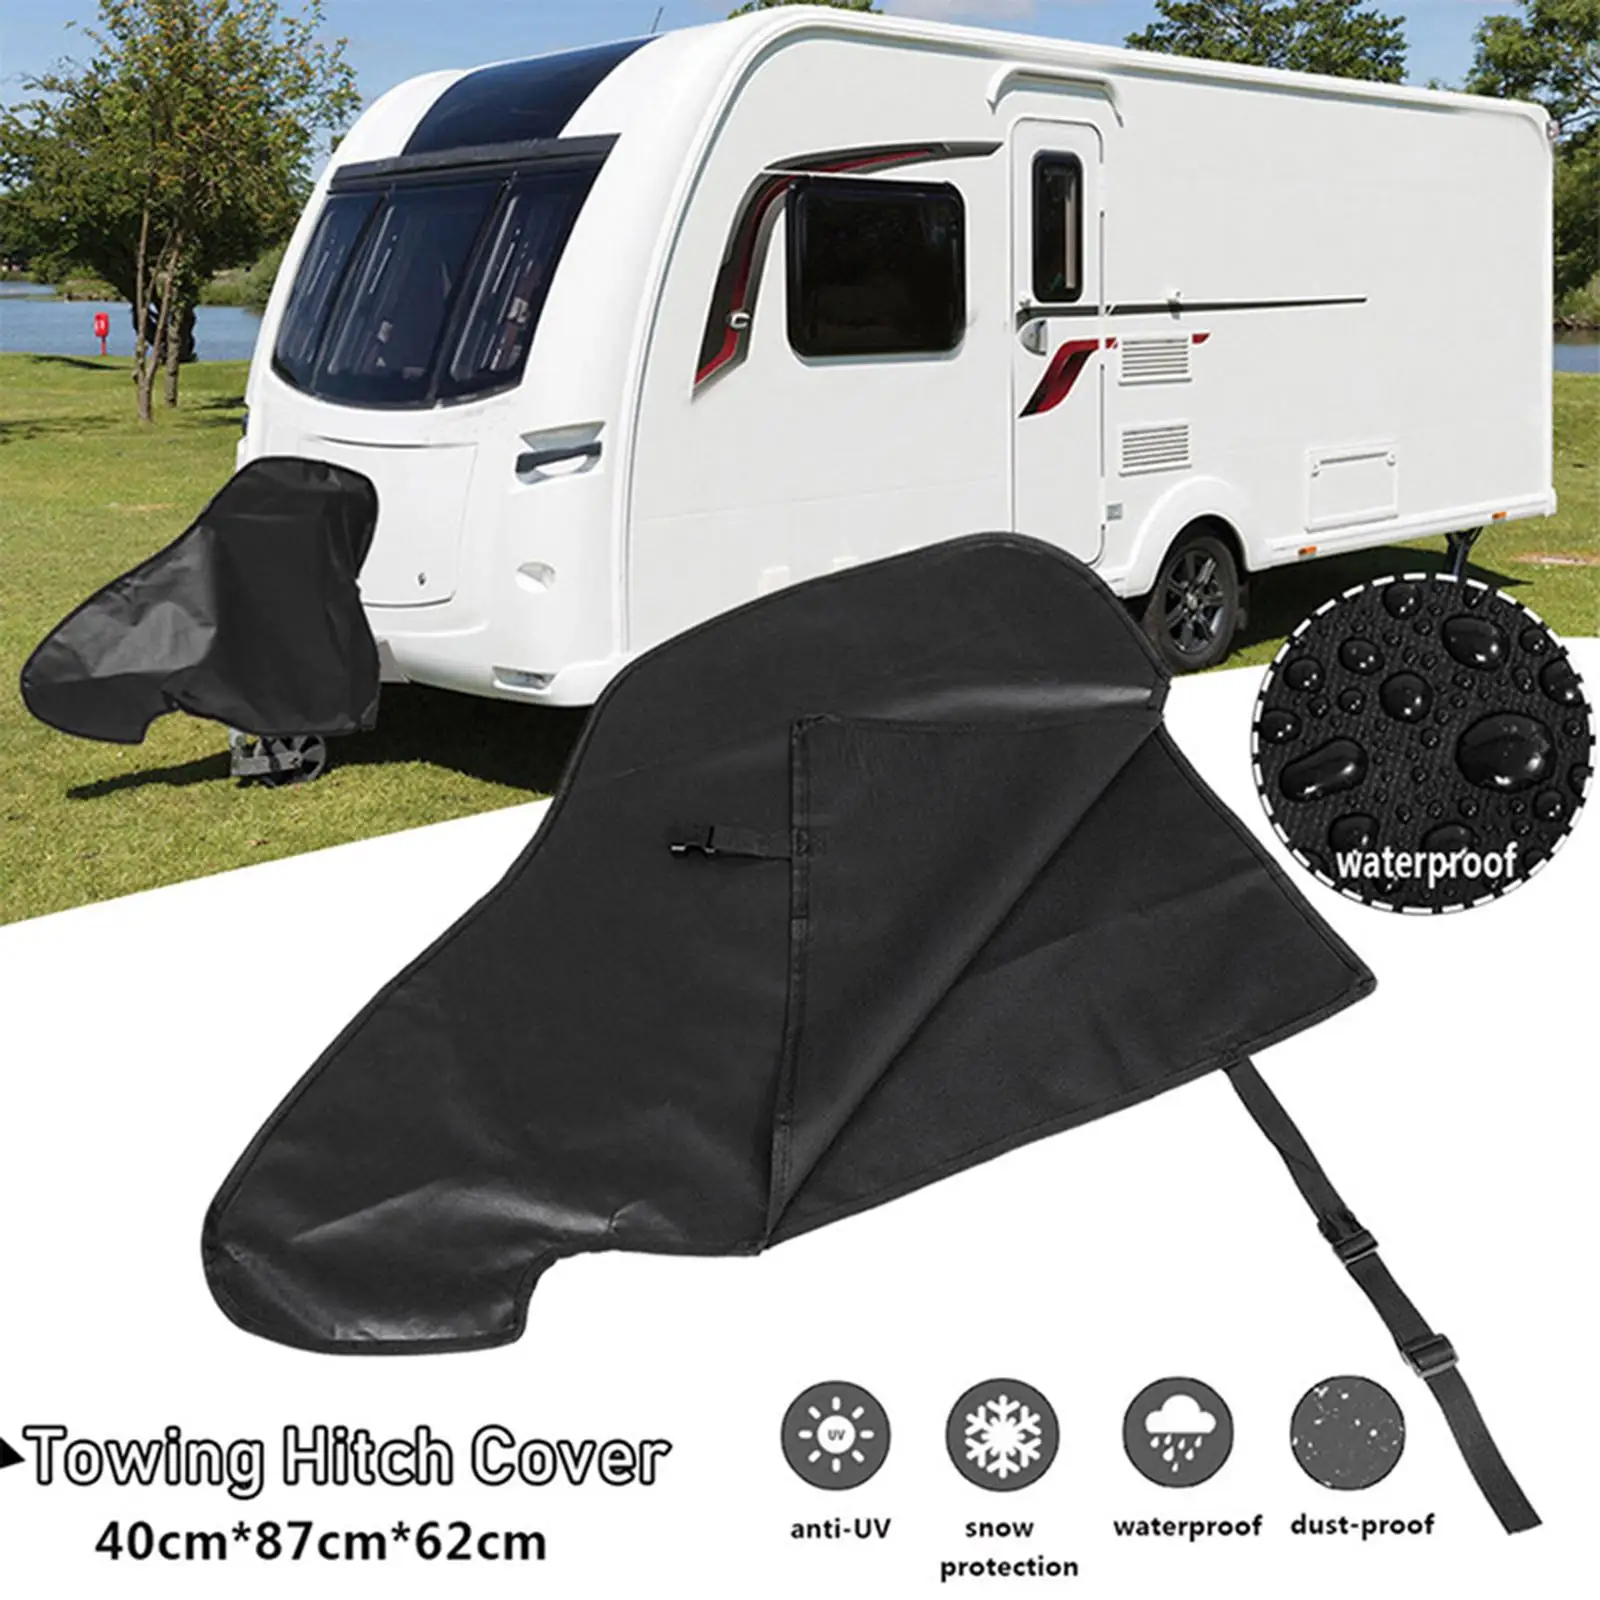 Caravan Towing Hitch Cover, RV Covers Campervan Universal Hitch Connector Trailer